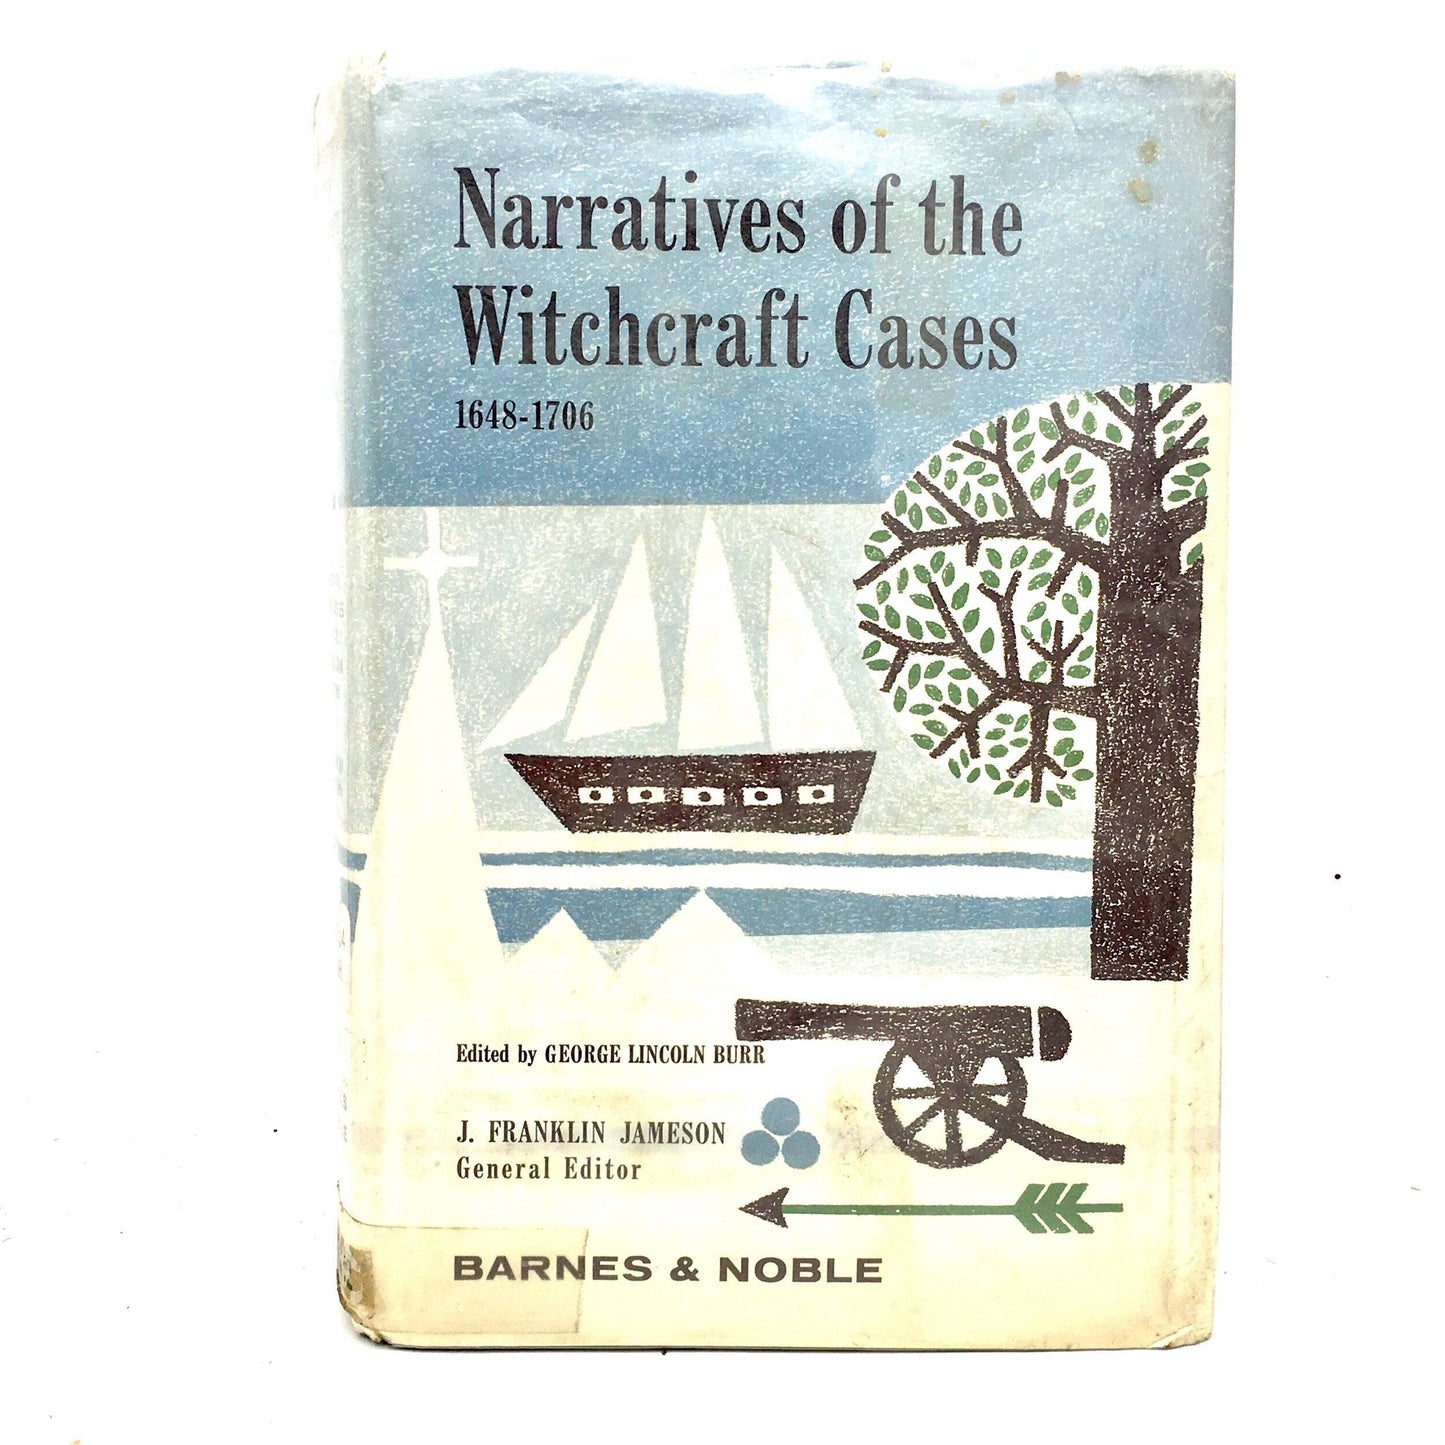 BURR, George Lincoln “Narratives of the Witchcraft Cases, 1648-1706” [Barnes & Noble, 1966] - Buzz Bookstore